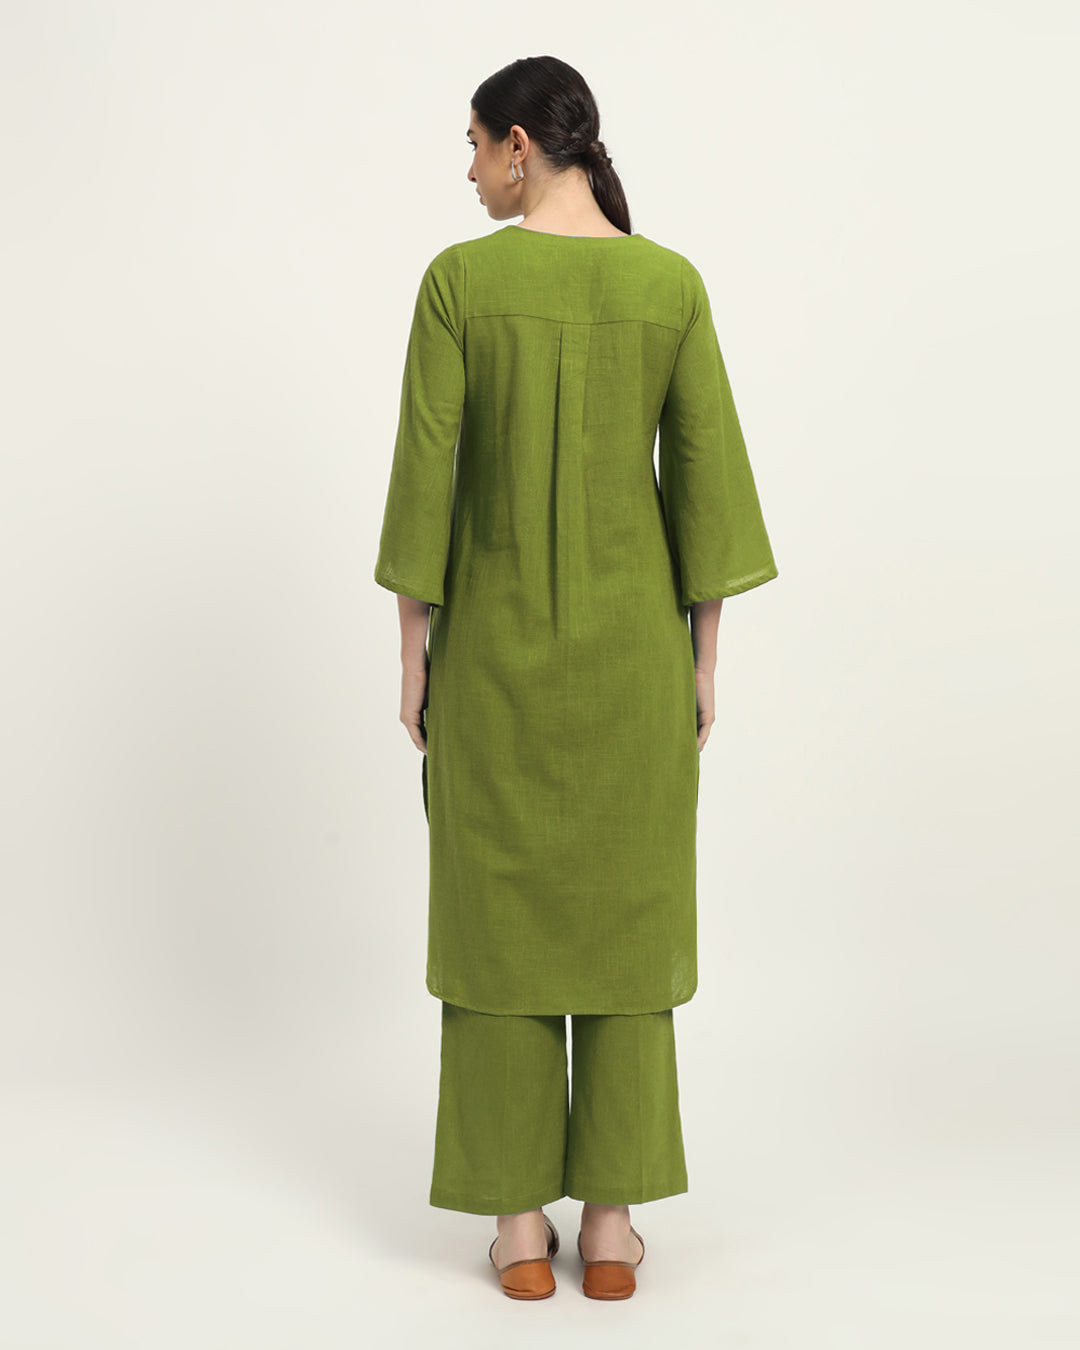 Combo: Lilac & Sage Green Rounded Reverie Solid Kurta